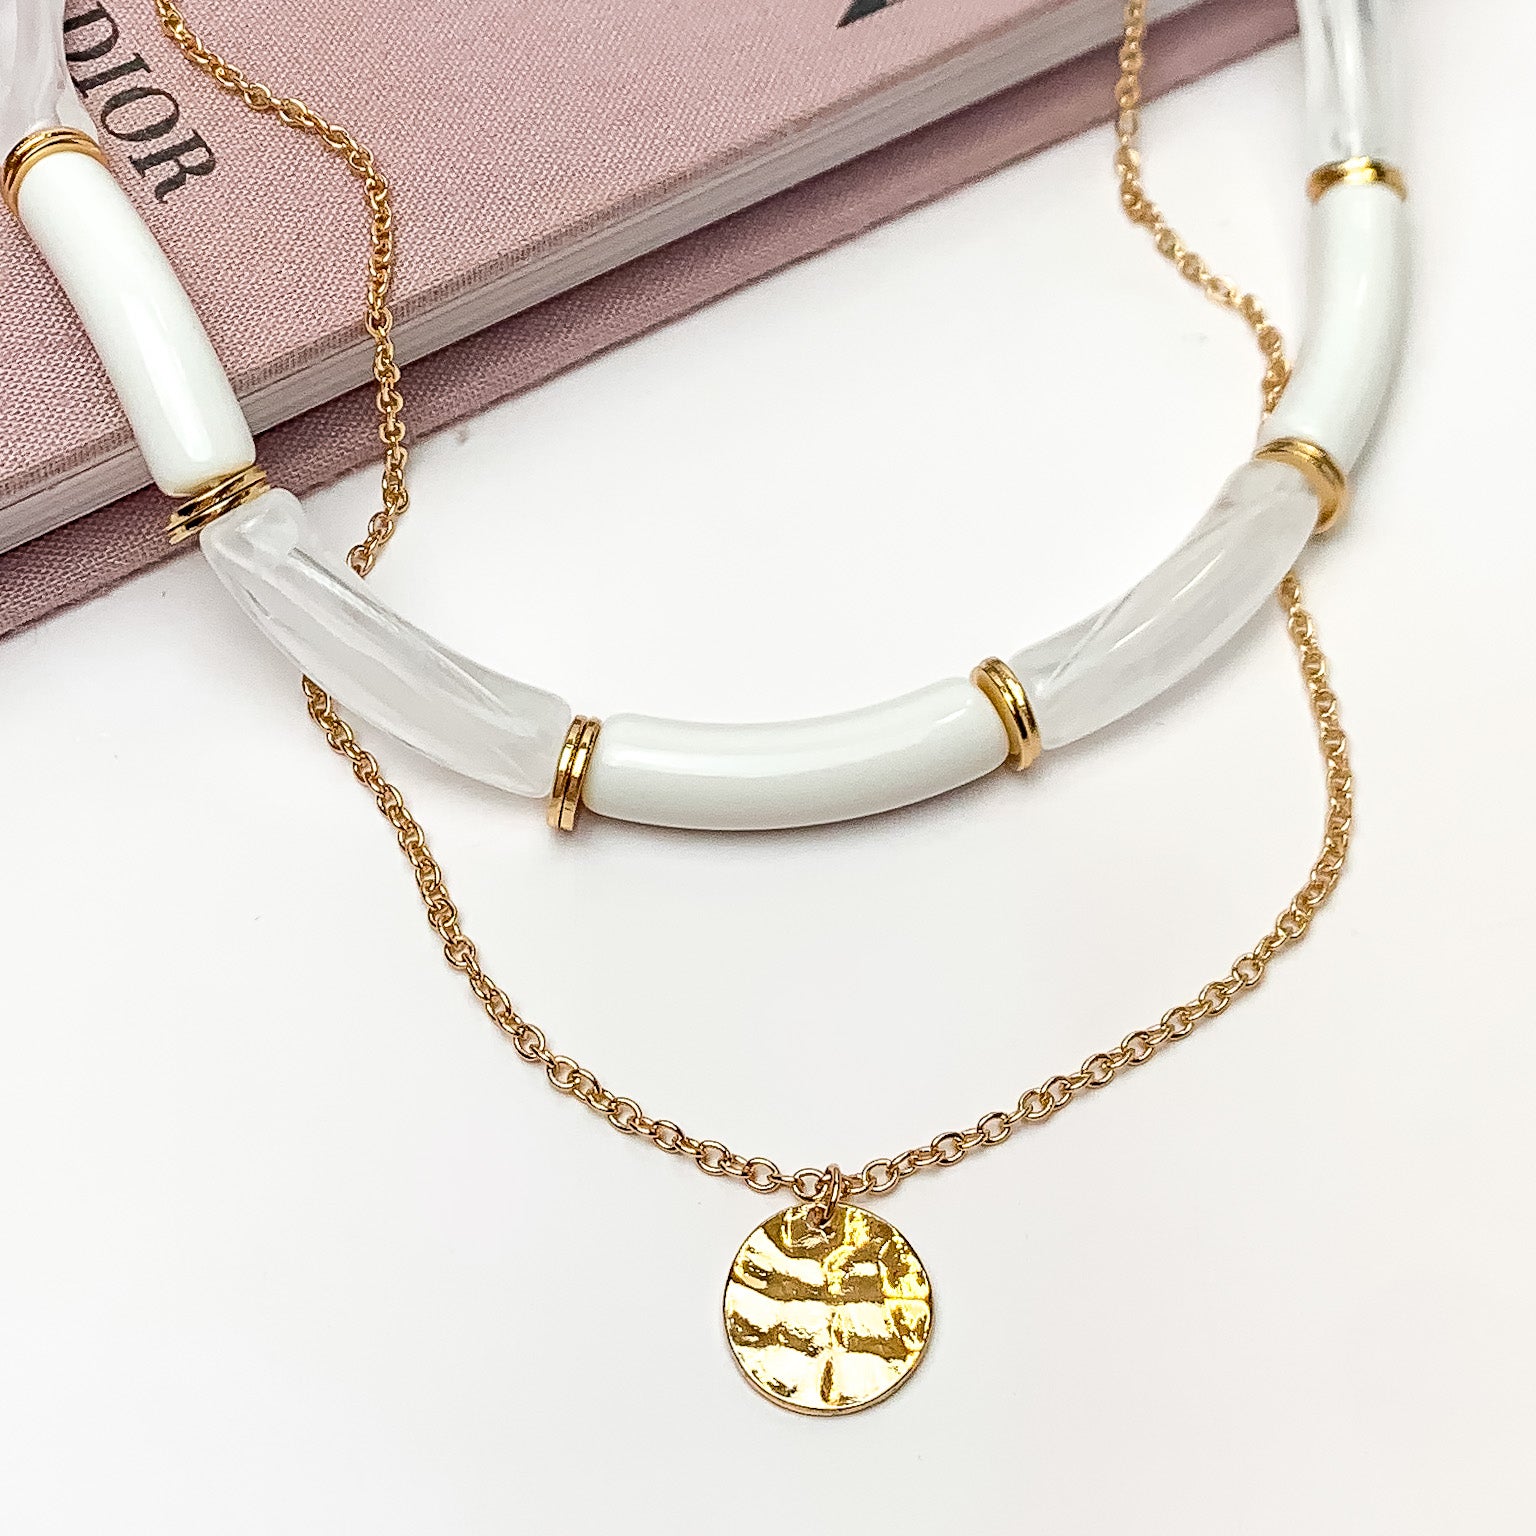 Perfect Paradise Tube Necklace With Second Gold Tone Chain Necklace. Pictured on a white background with the necklace laying on a book.